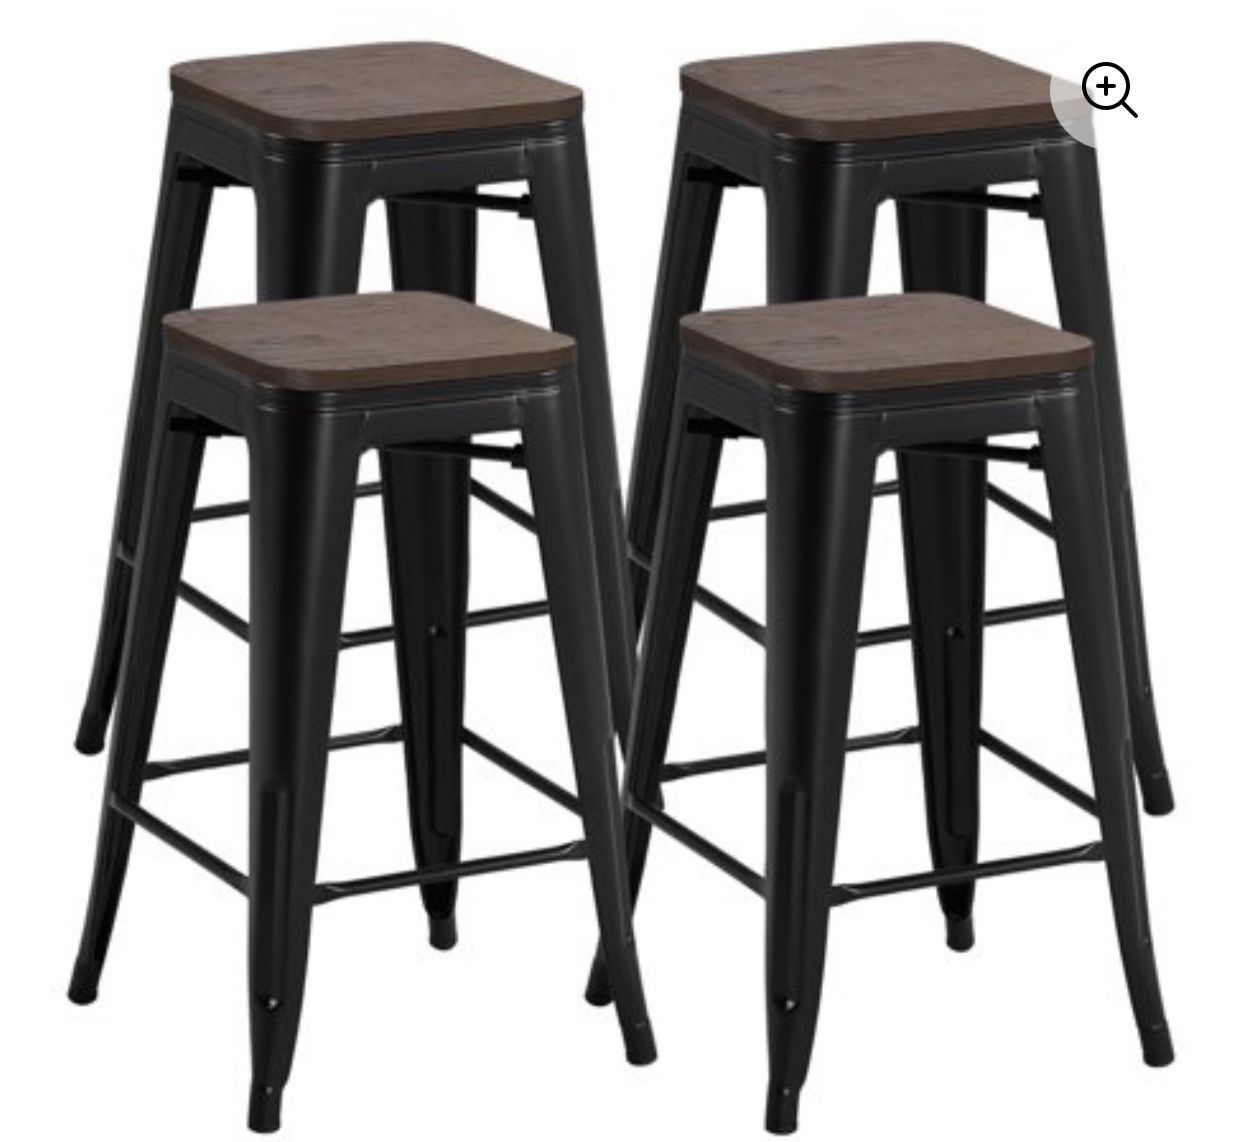 Yaheetech 26 '' Set of 4 barstools Counter Height Metal Bar Stools, Indoor Outdoor Stackable Bartool Industrial with Wood Seat 331Lb, Black